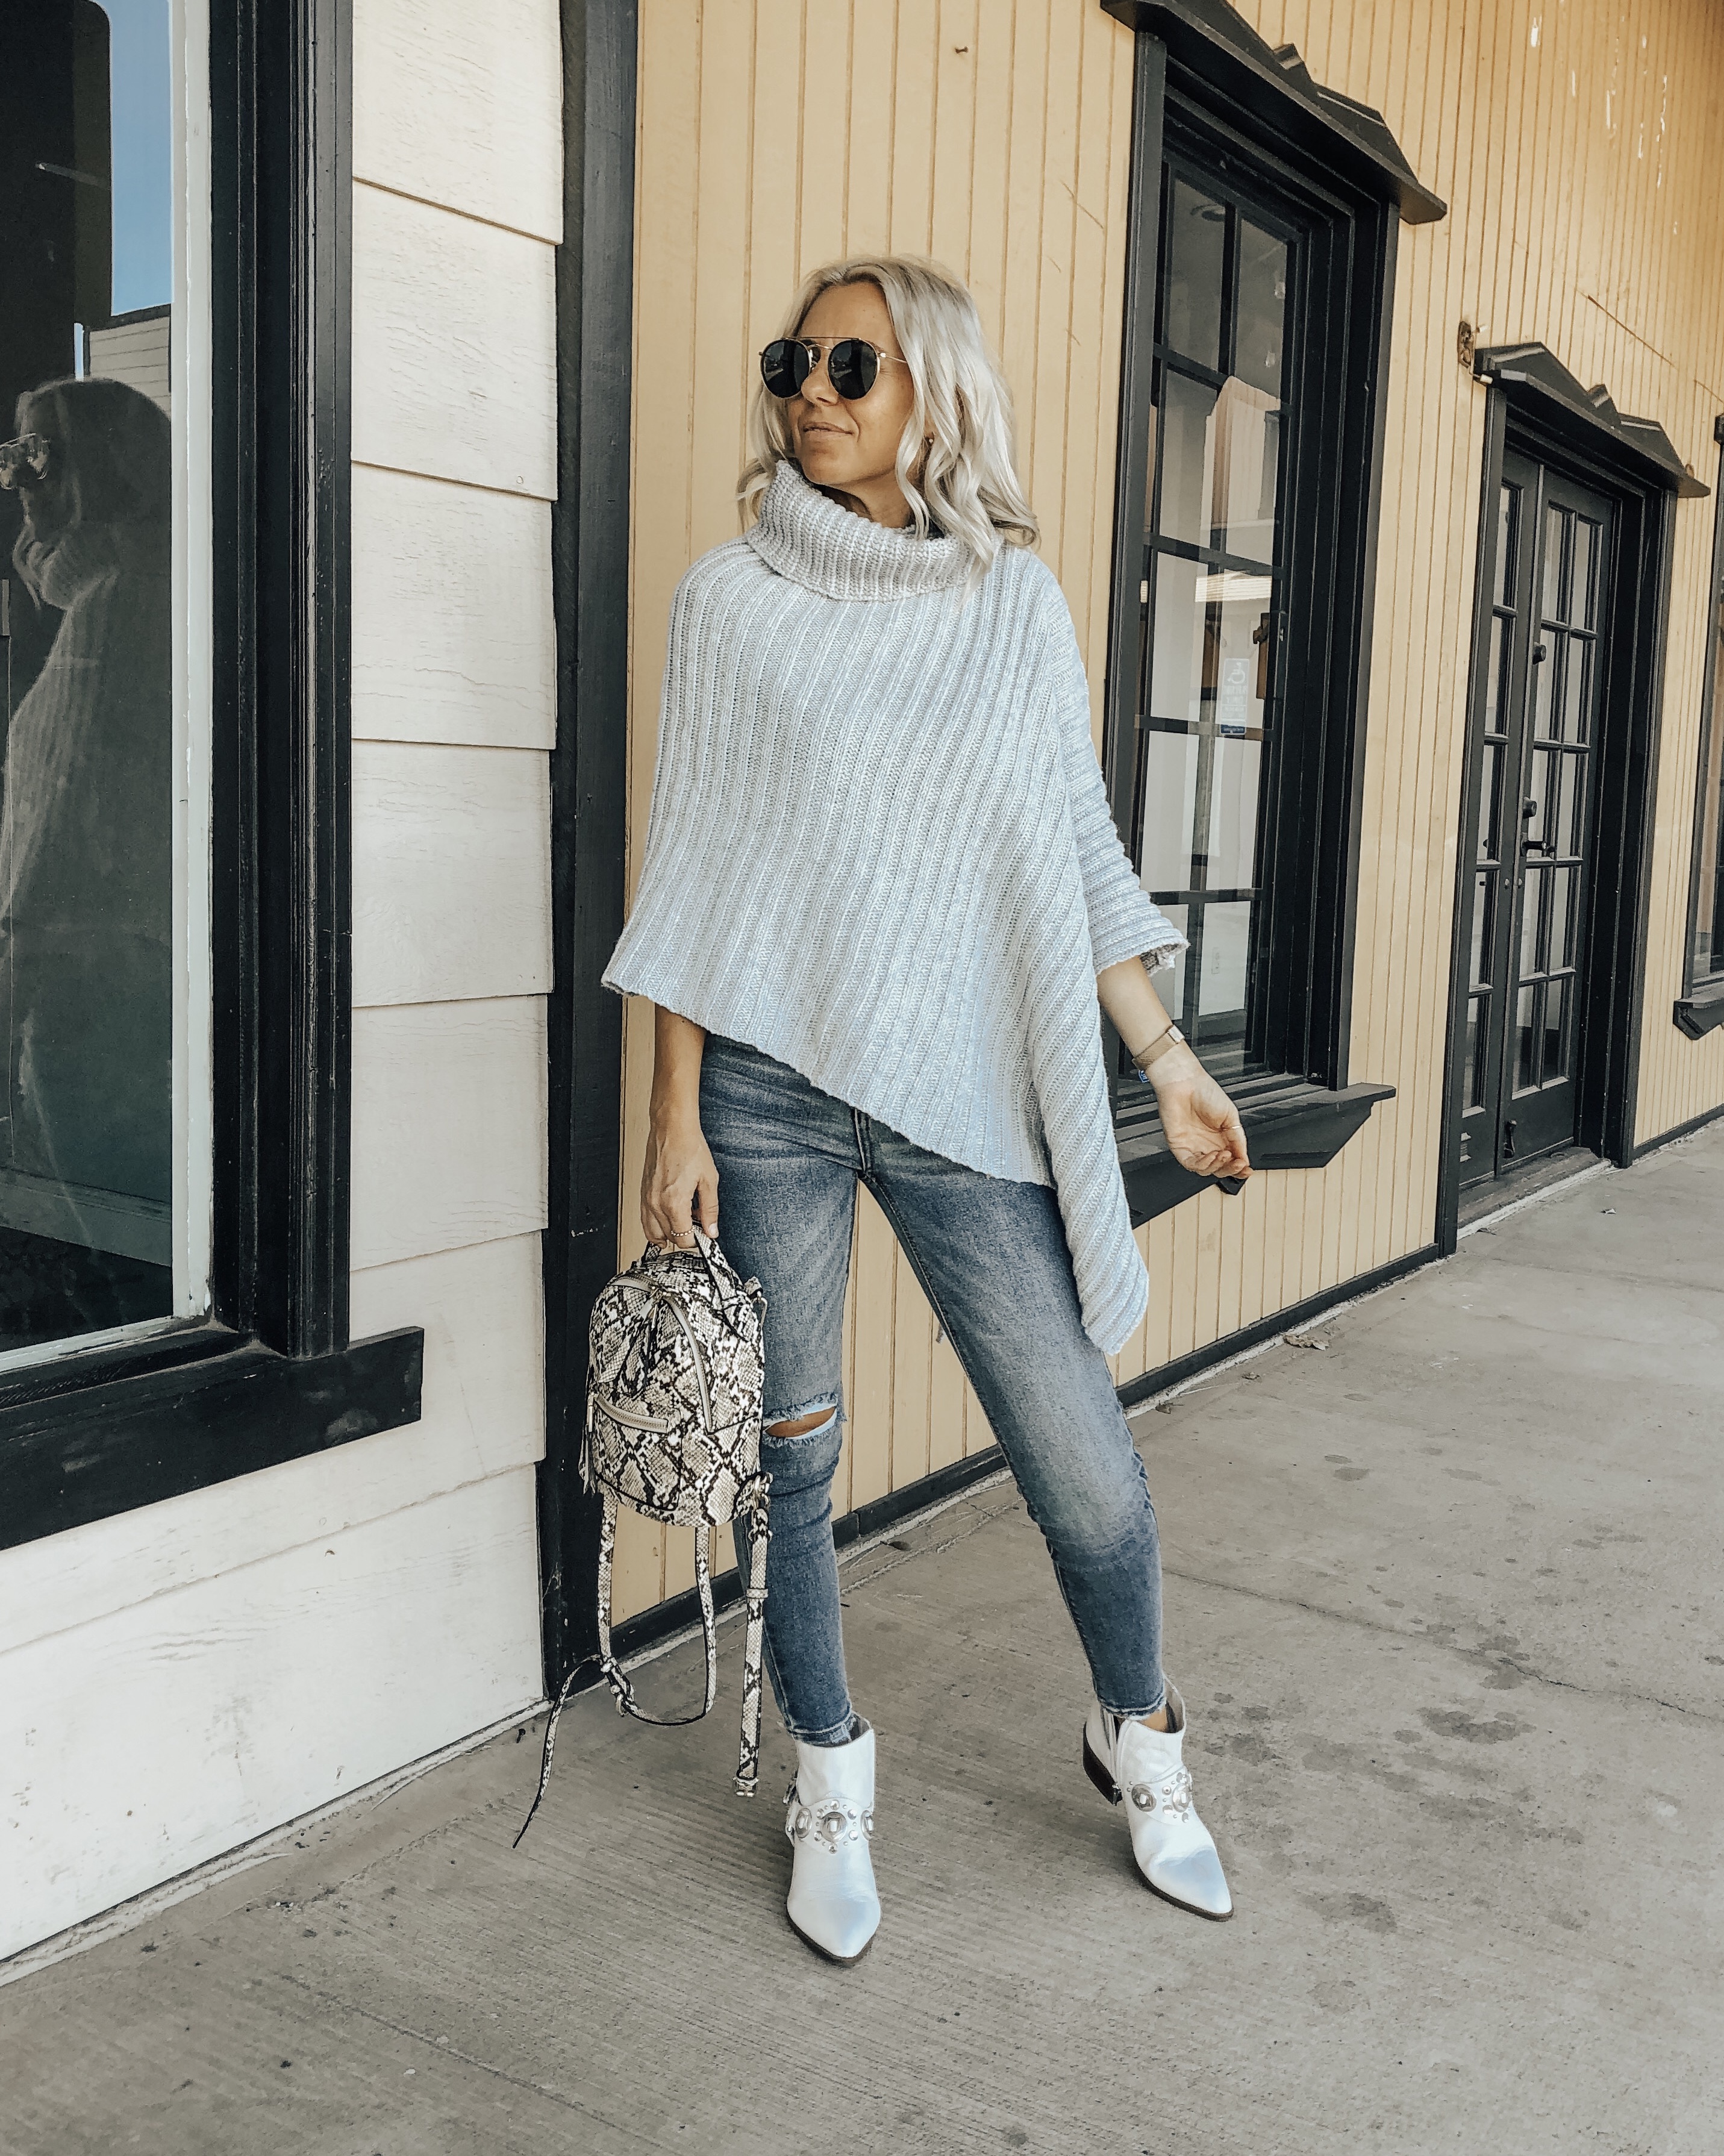 TREND ALERT: THE PONCHO SWEATER- Jaclyn De Leon Style + the poncho sweater trend is back in a big way! It's comfy + cozy and the perfect piece to throw over a top and jeans to completely update your look. This Amazon find is a must- have piece